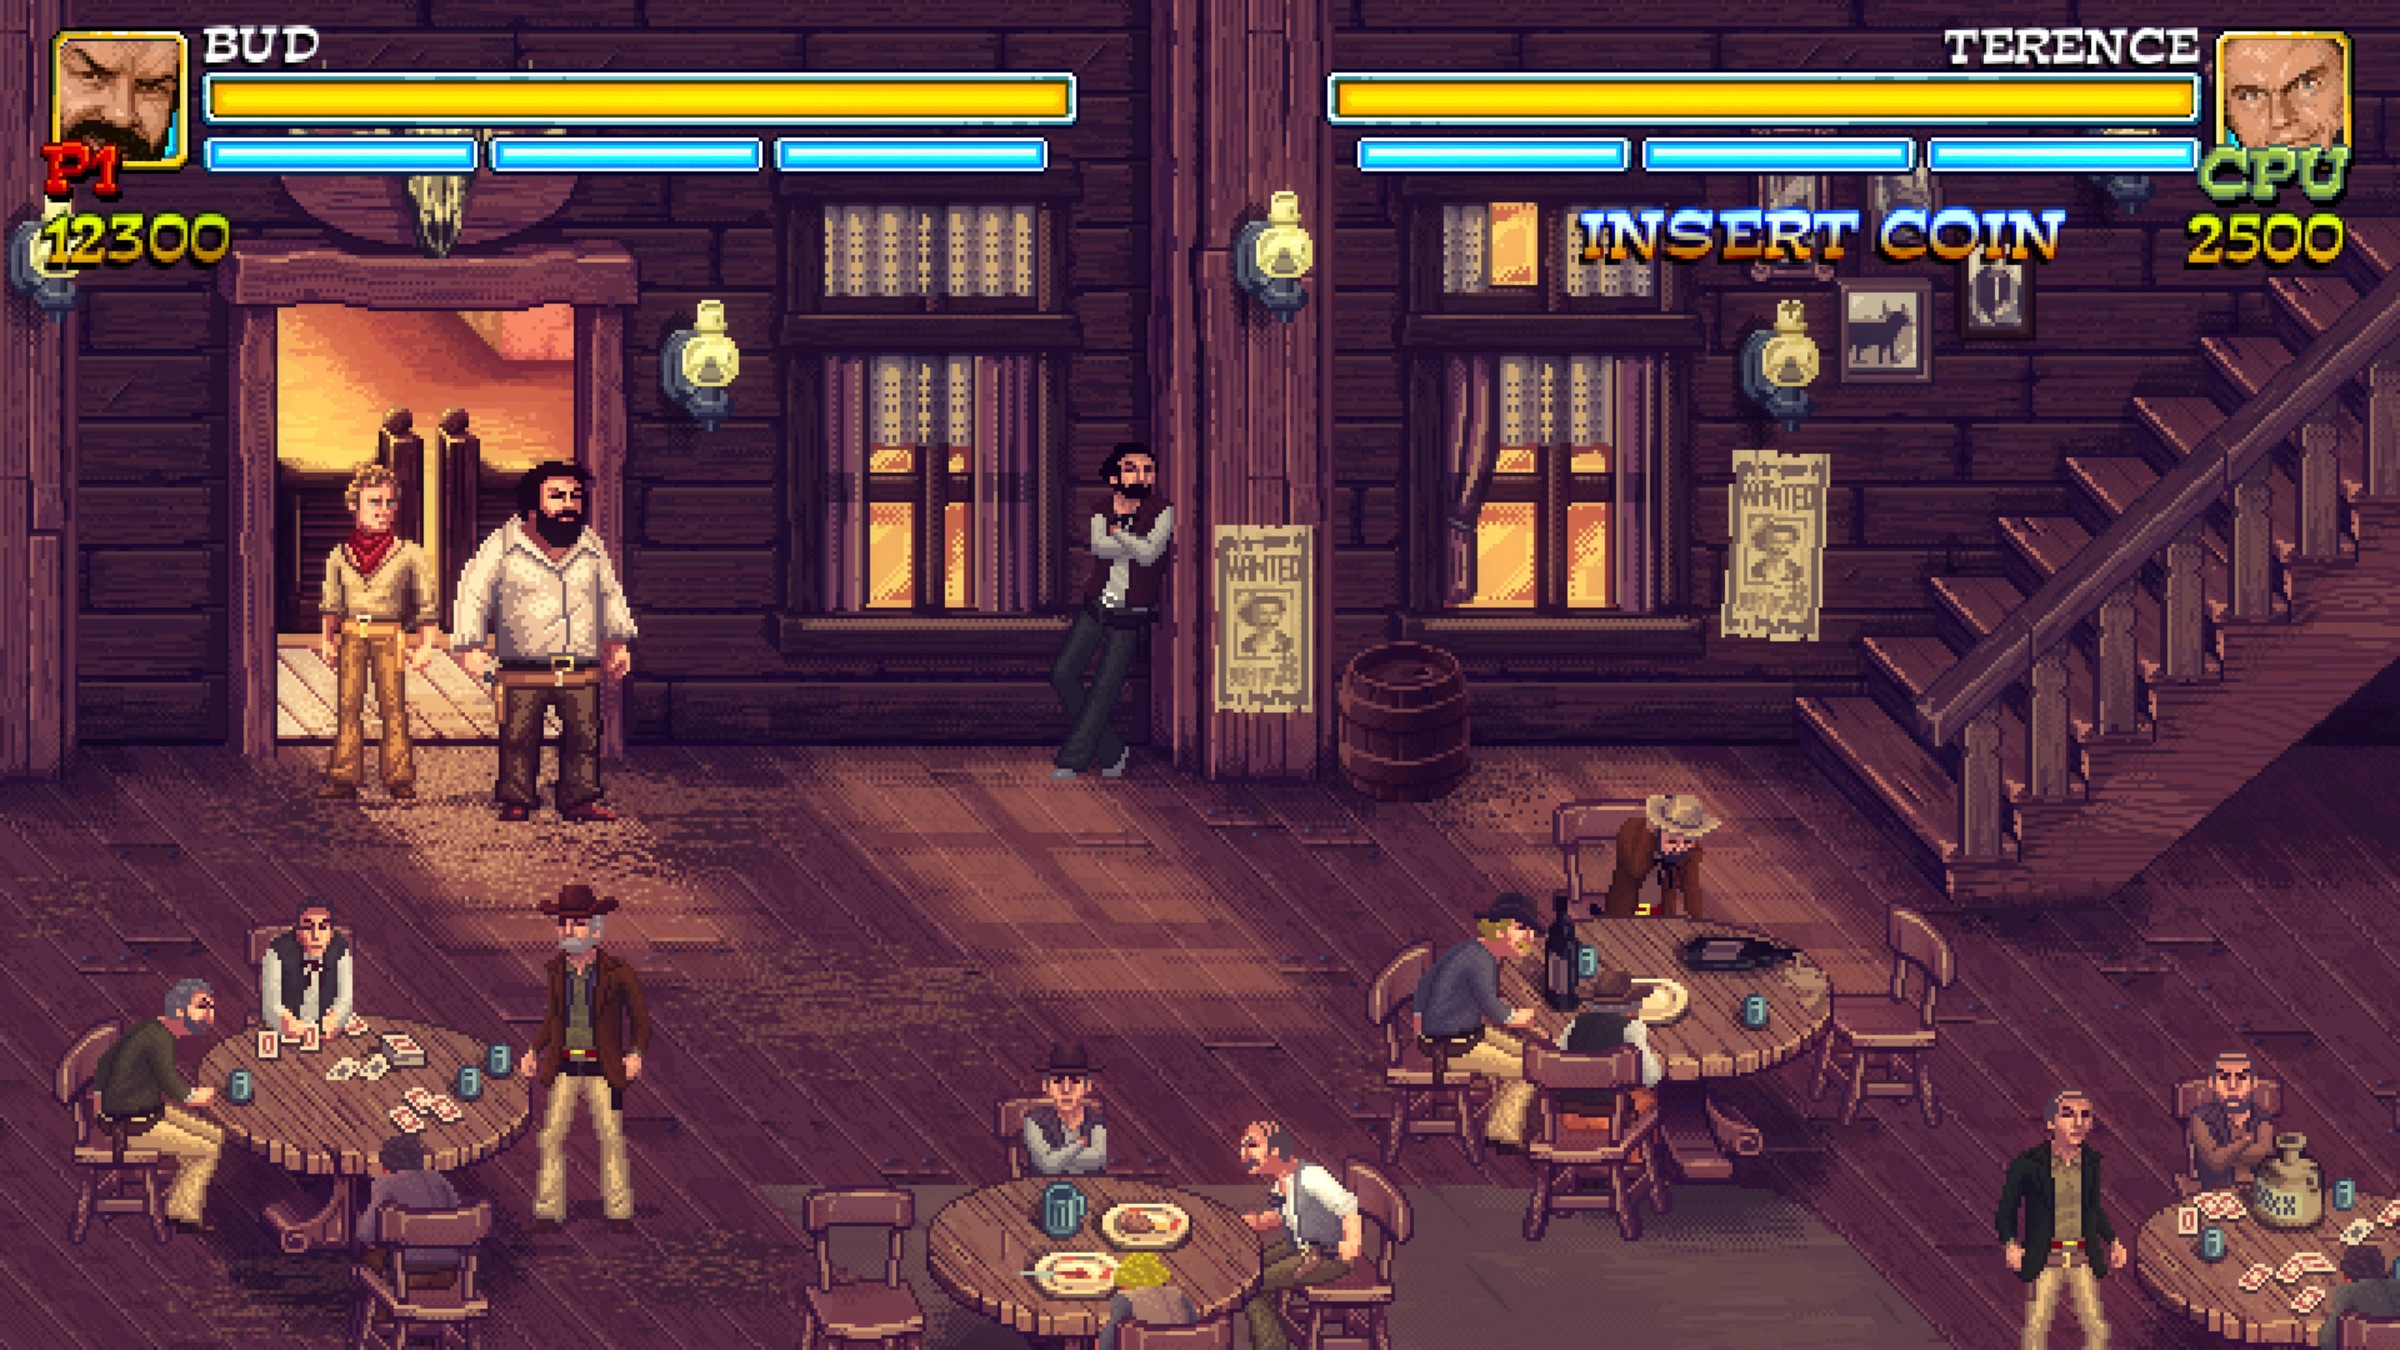 Spielesoftware »Bud Spencer & Terence: Hill Slaps and Beans«, PlayStation 4